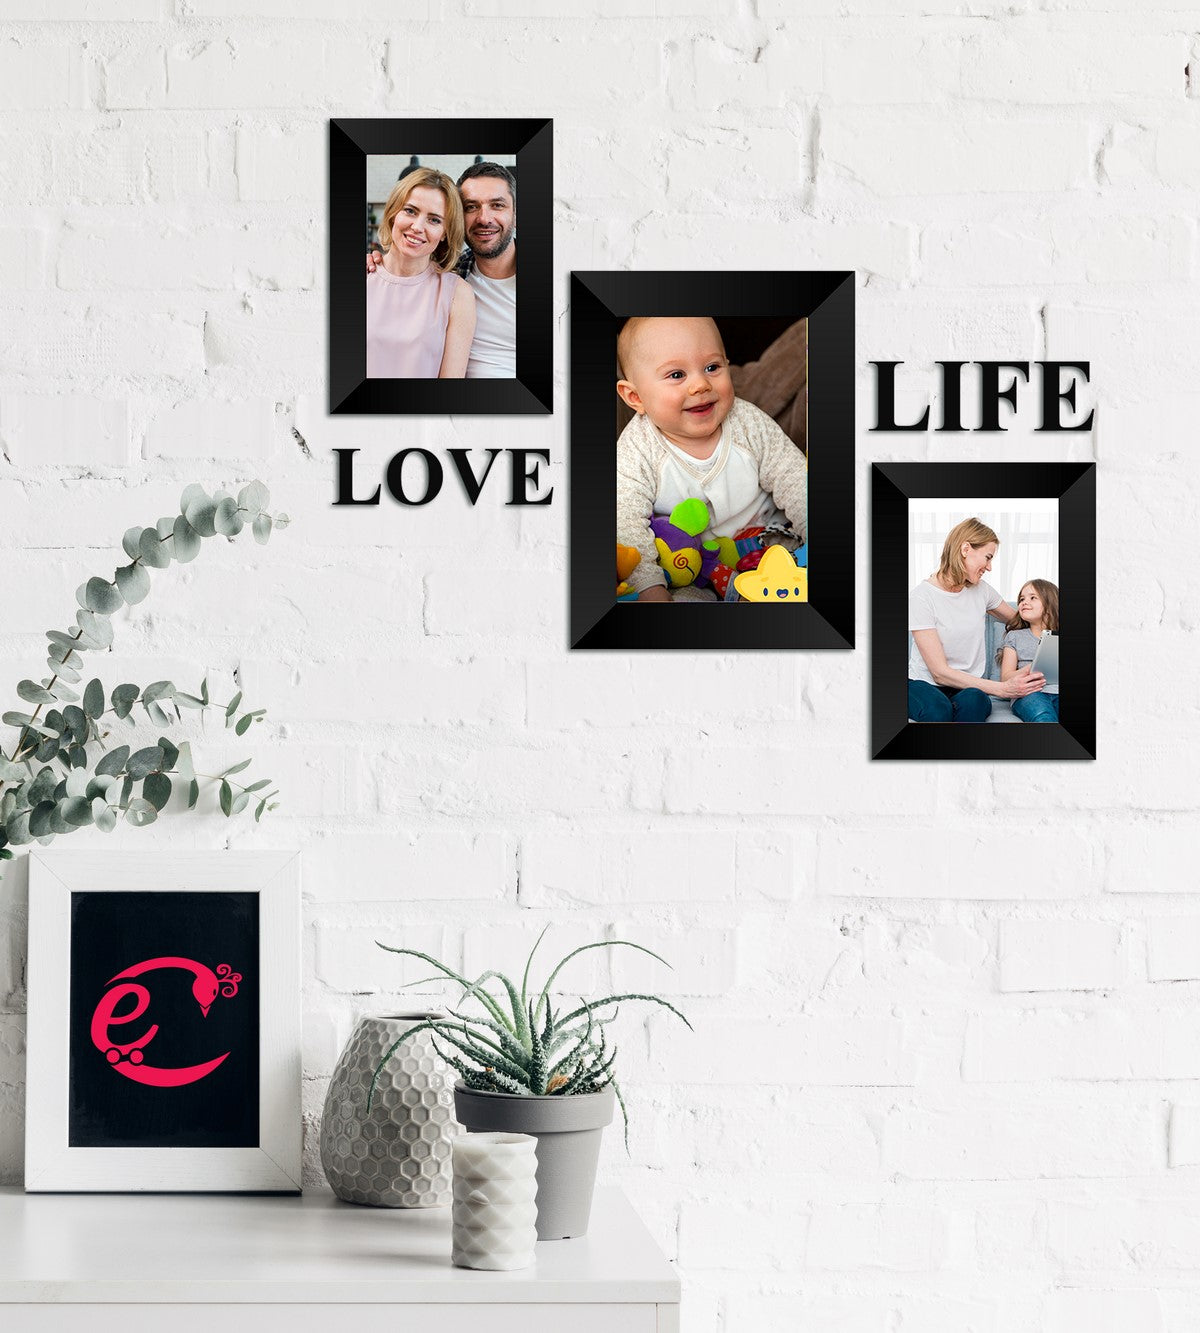 Memory Wall Collage Photo Frame - Set of 3 Photo Frames for 2 Photos of 4"x6", 1 Photos of 5"x7", 1 Piece of LOVE, 1 Piece of LIFE 1